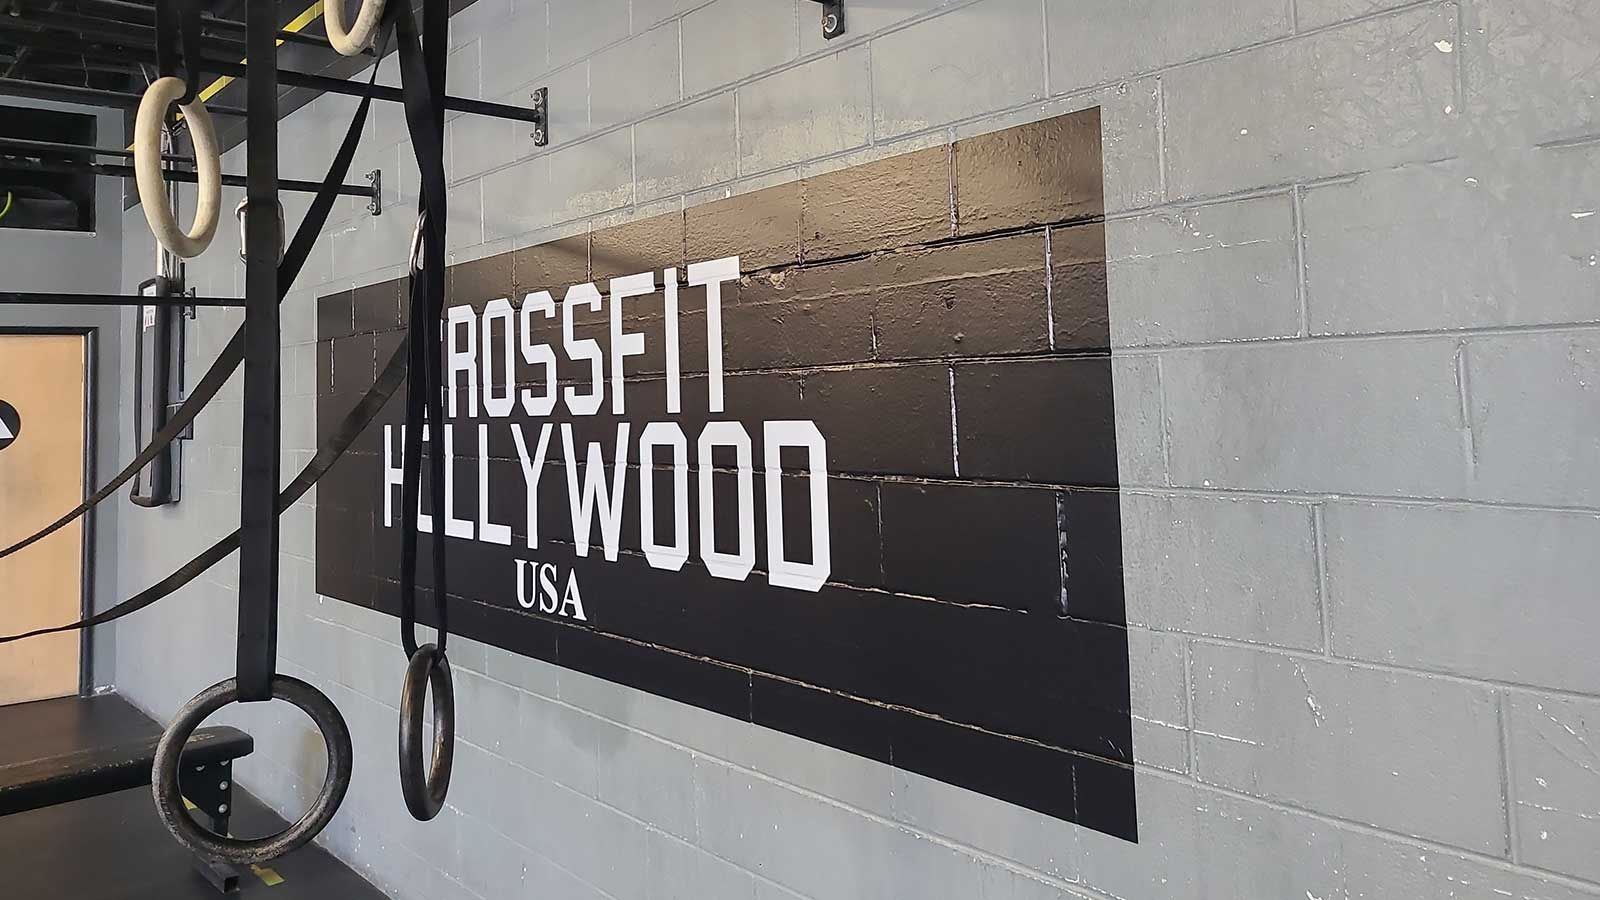 Crossfit Hollywood wall decal applied indoors